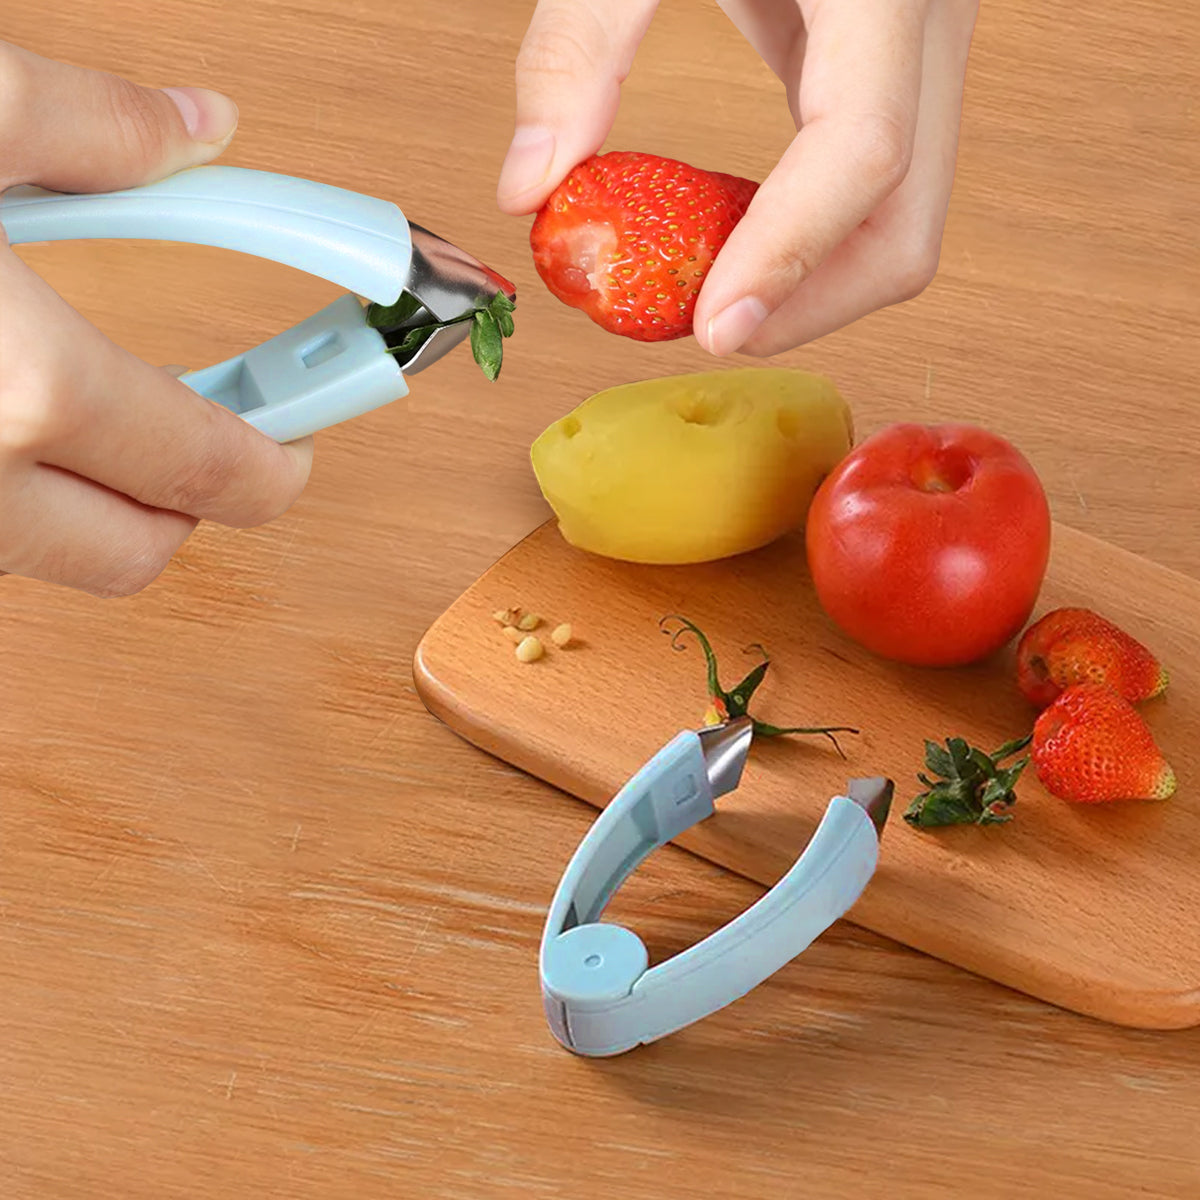 Fruit and Vegetable Stem Remover Strawberry Tomato Potato Pineapple Carrot Huller Corer Tweezers Tool Kitchen Gadget